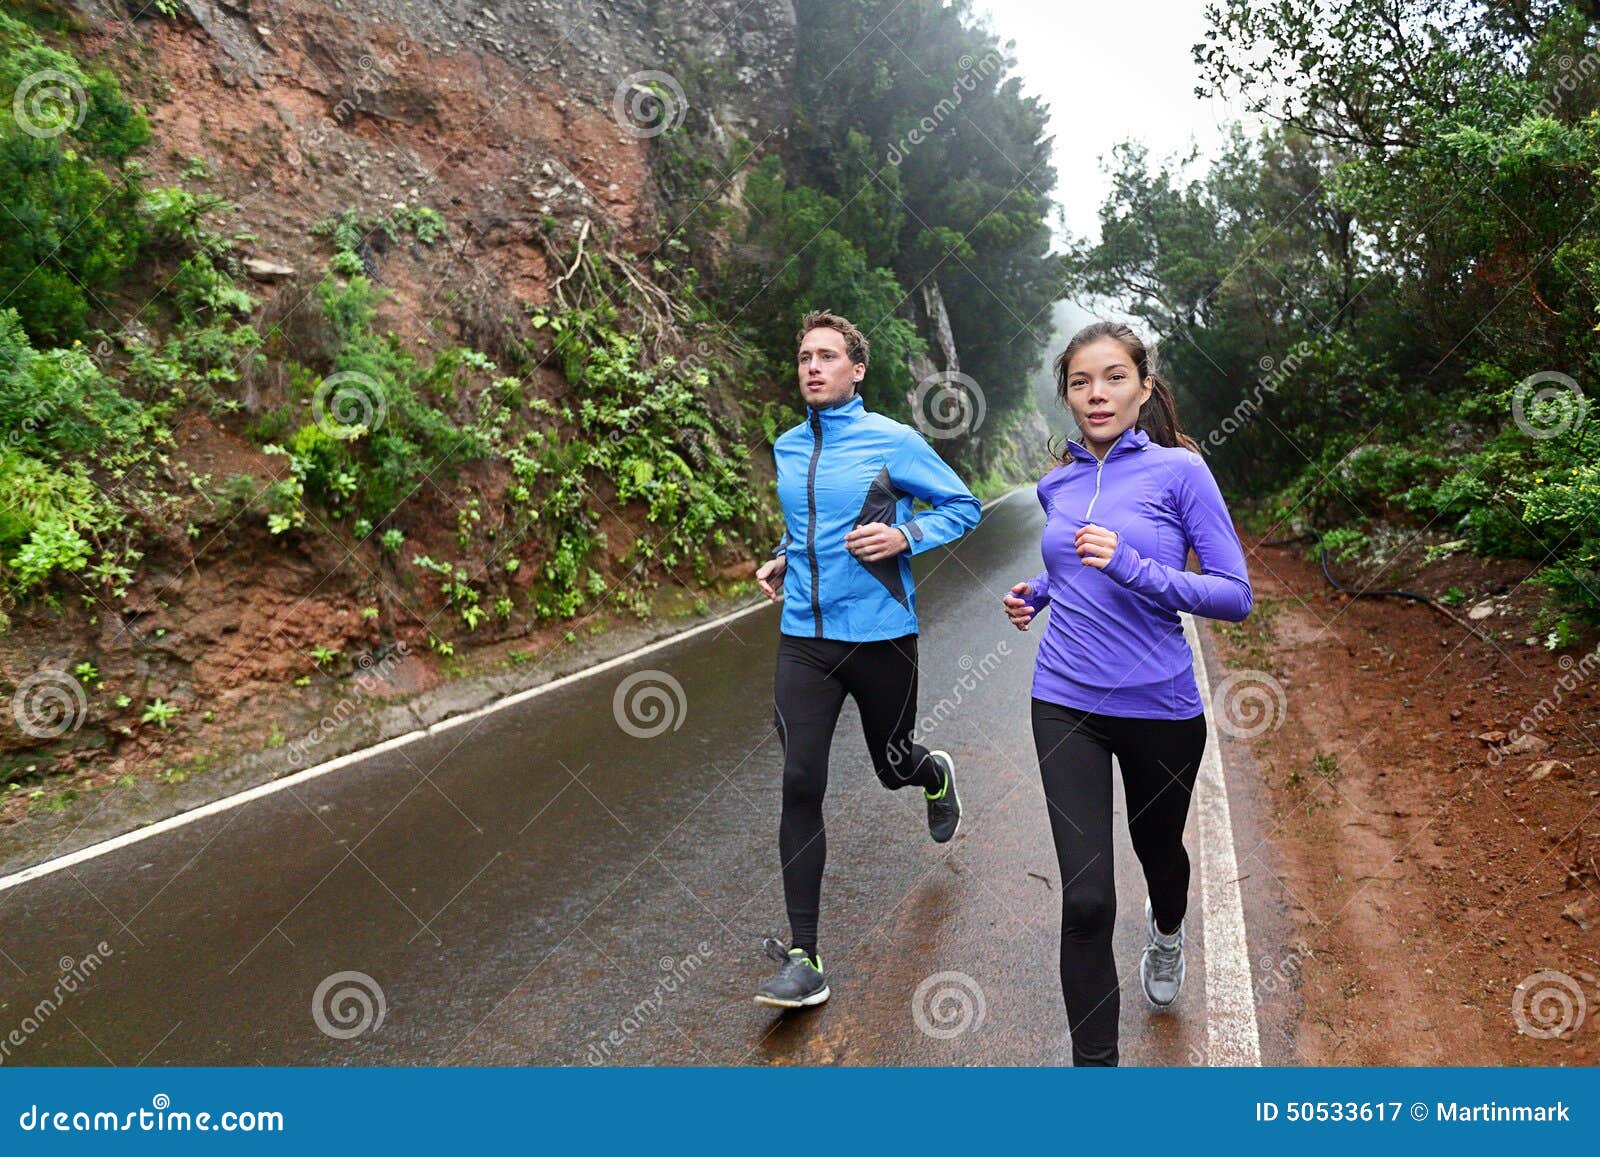 Healthy Lifestyle People Running On Country Road Stock Photo - Image ...